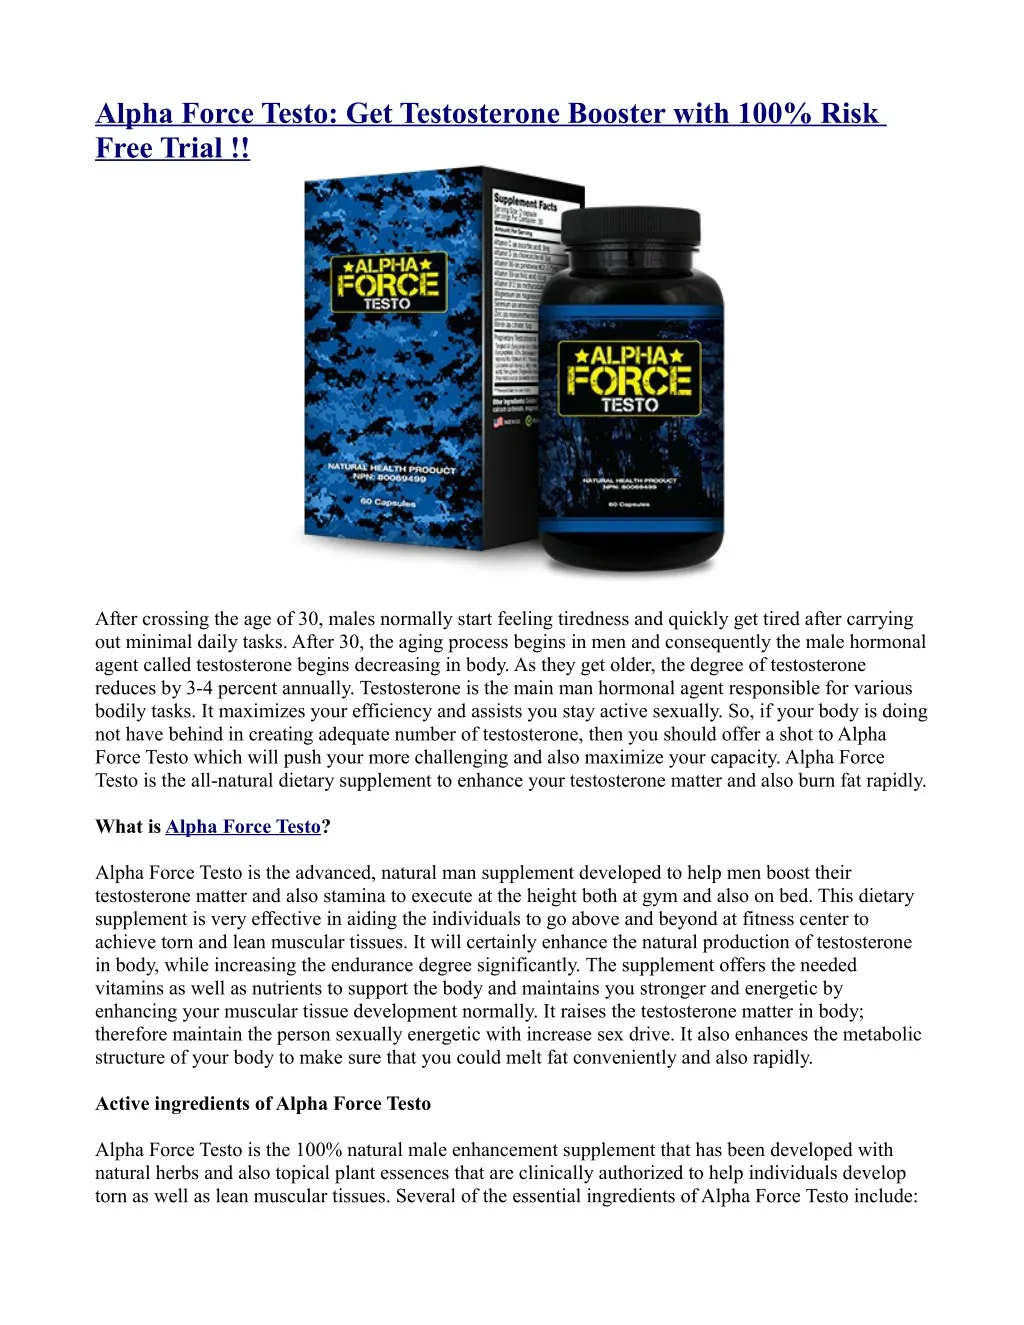 alpha force testo get testosterone booster with